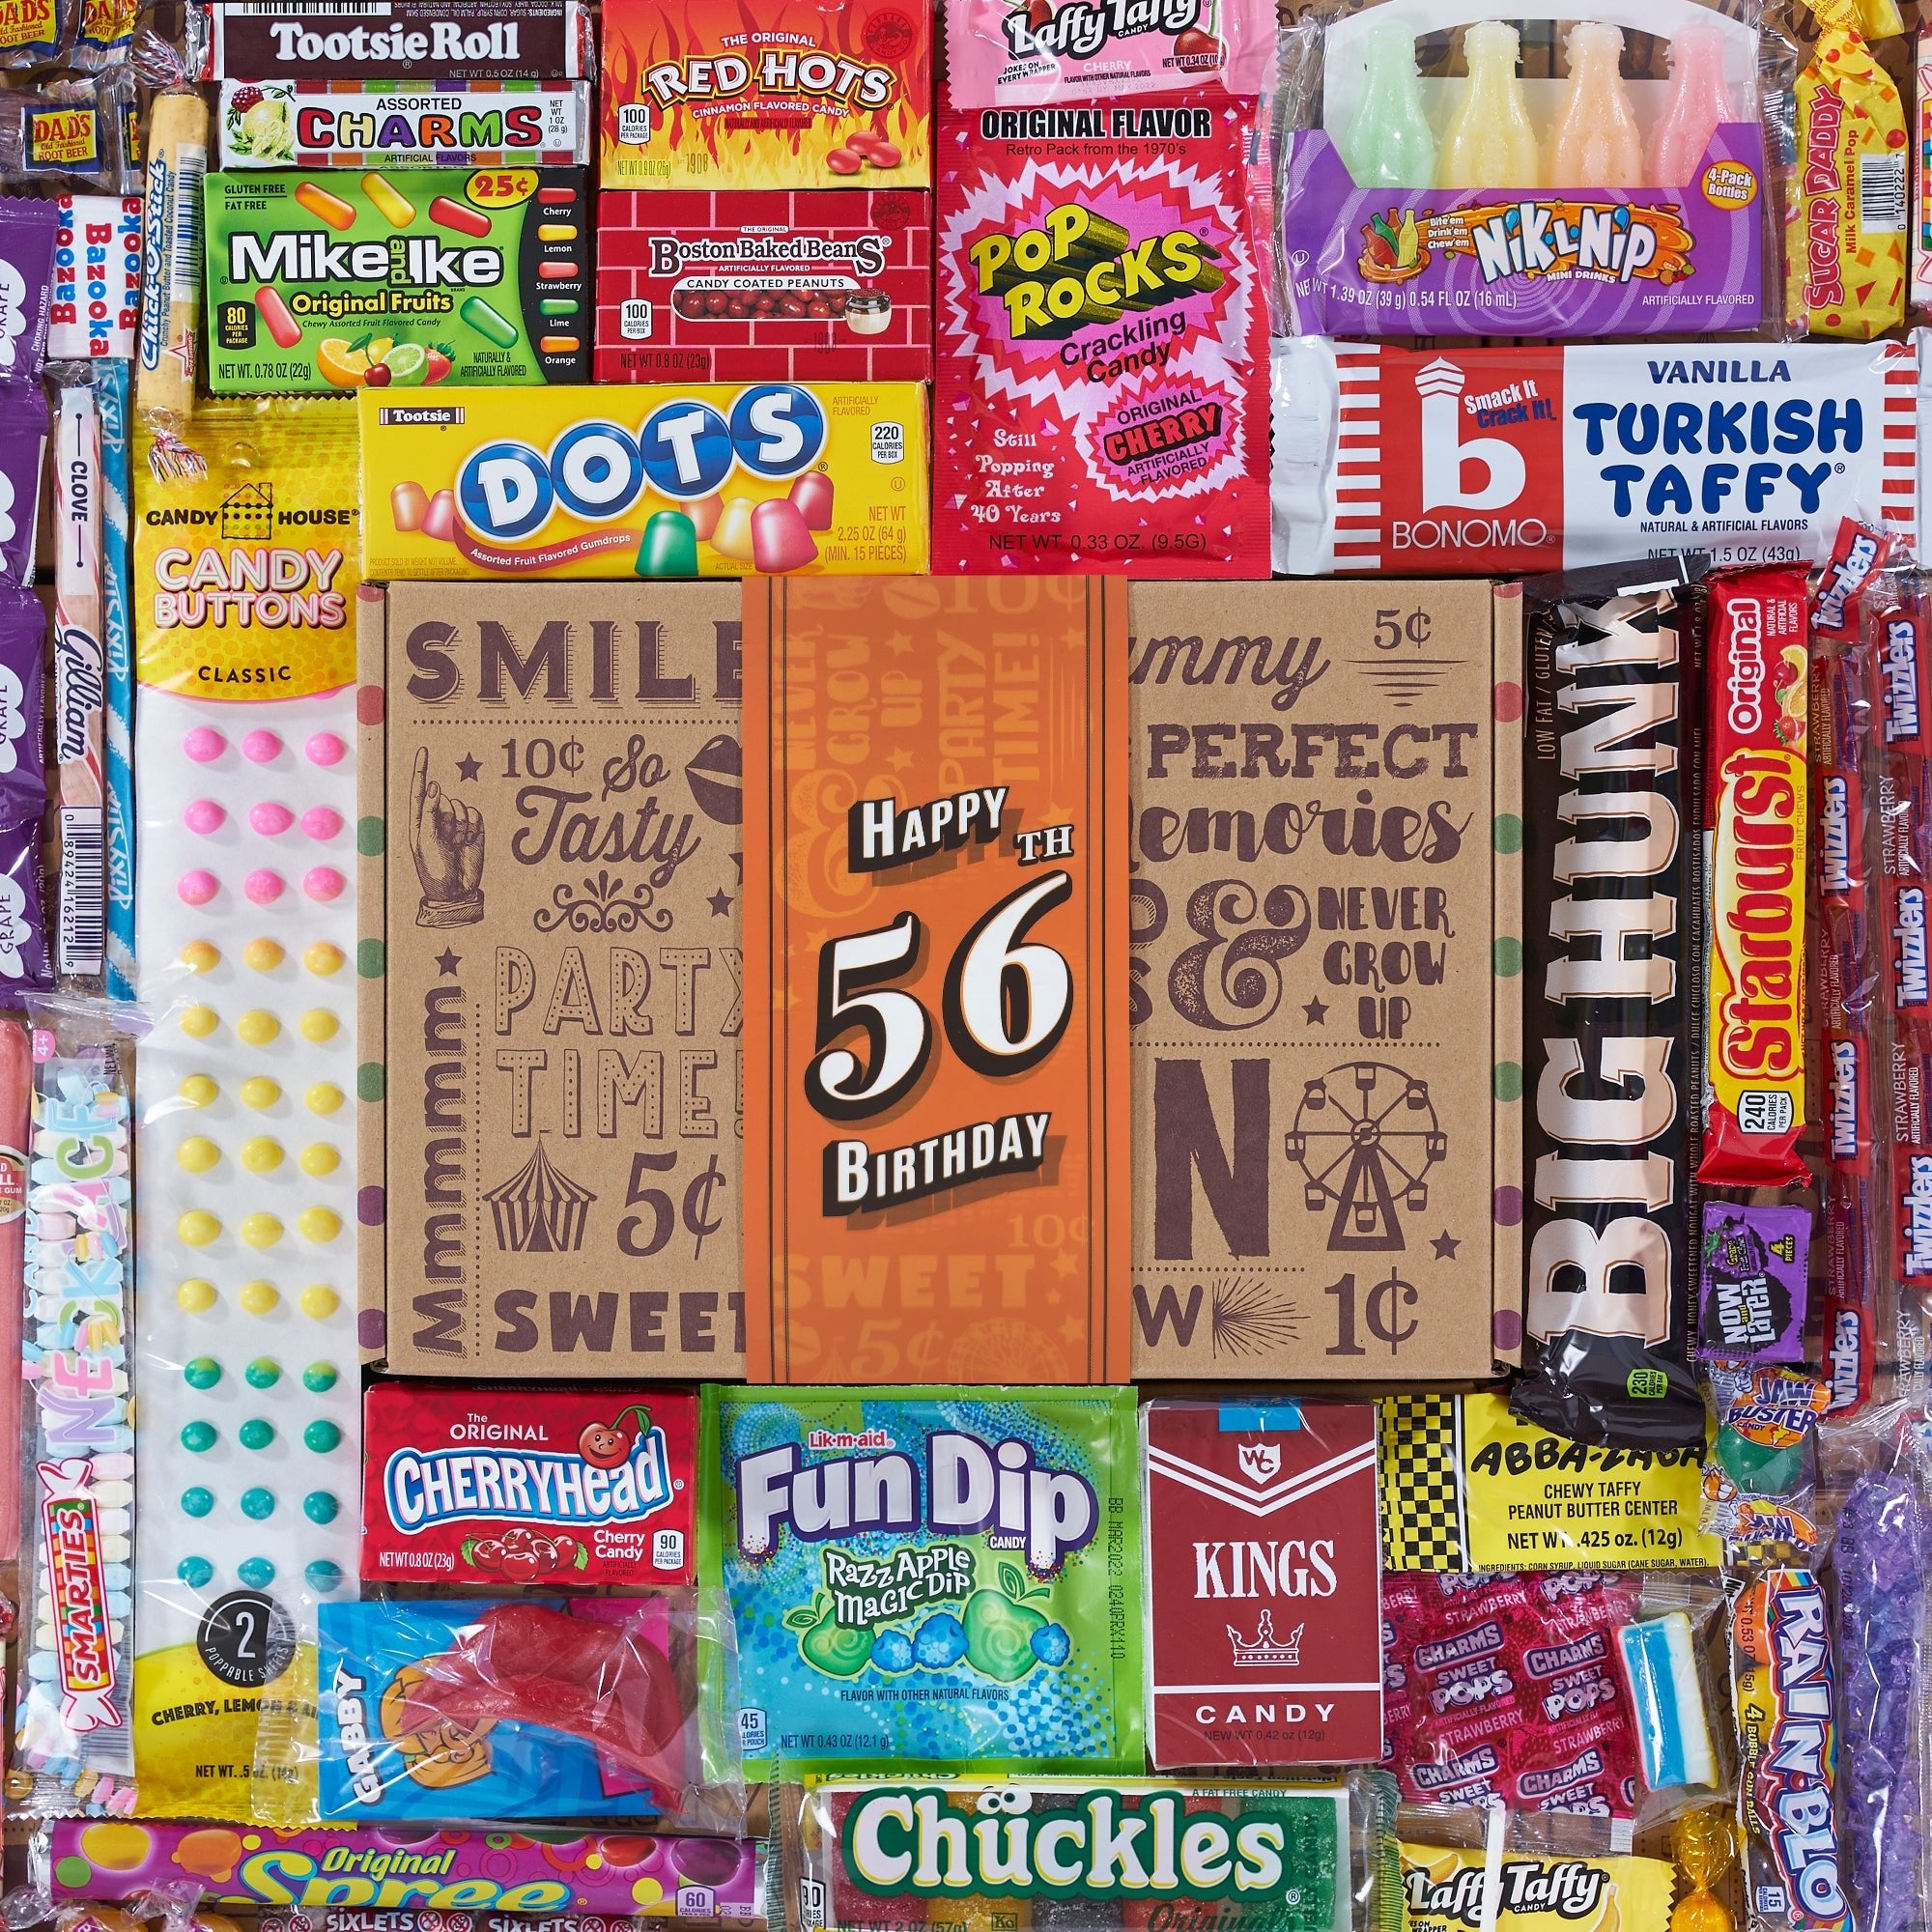 56th Birthday Retro Candy Gift - Vintage Candy Co.